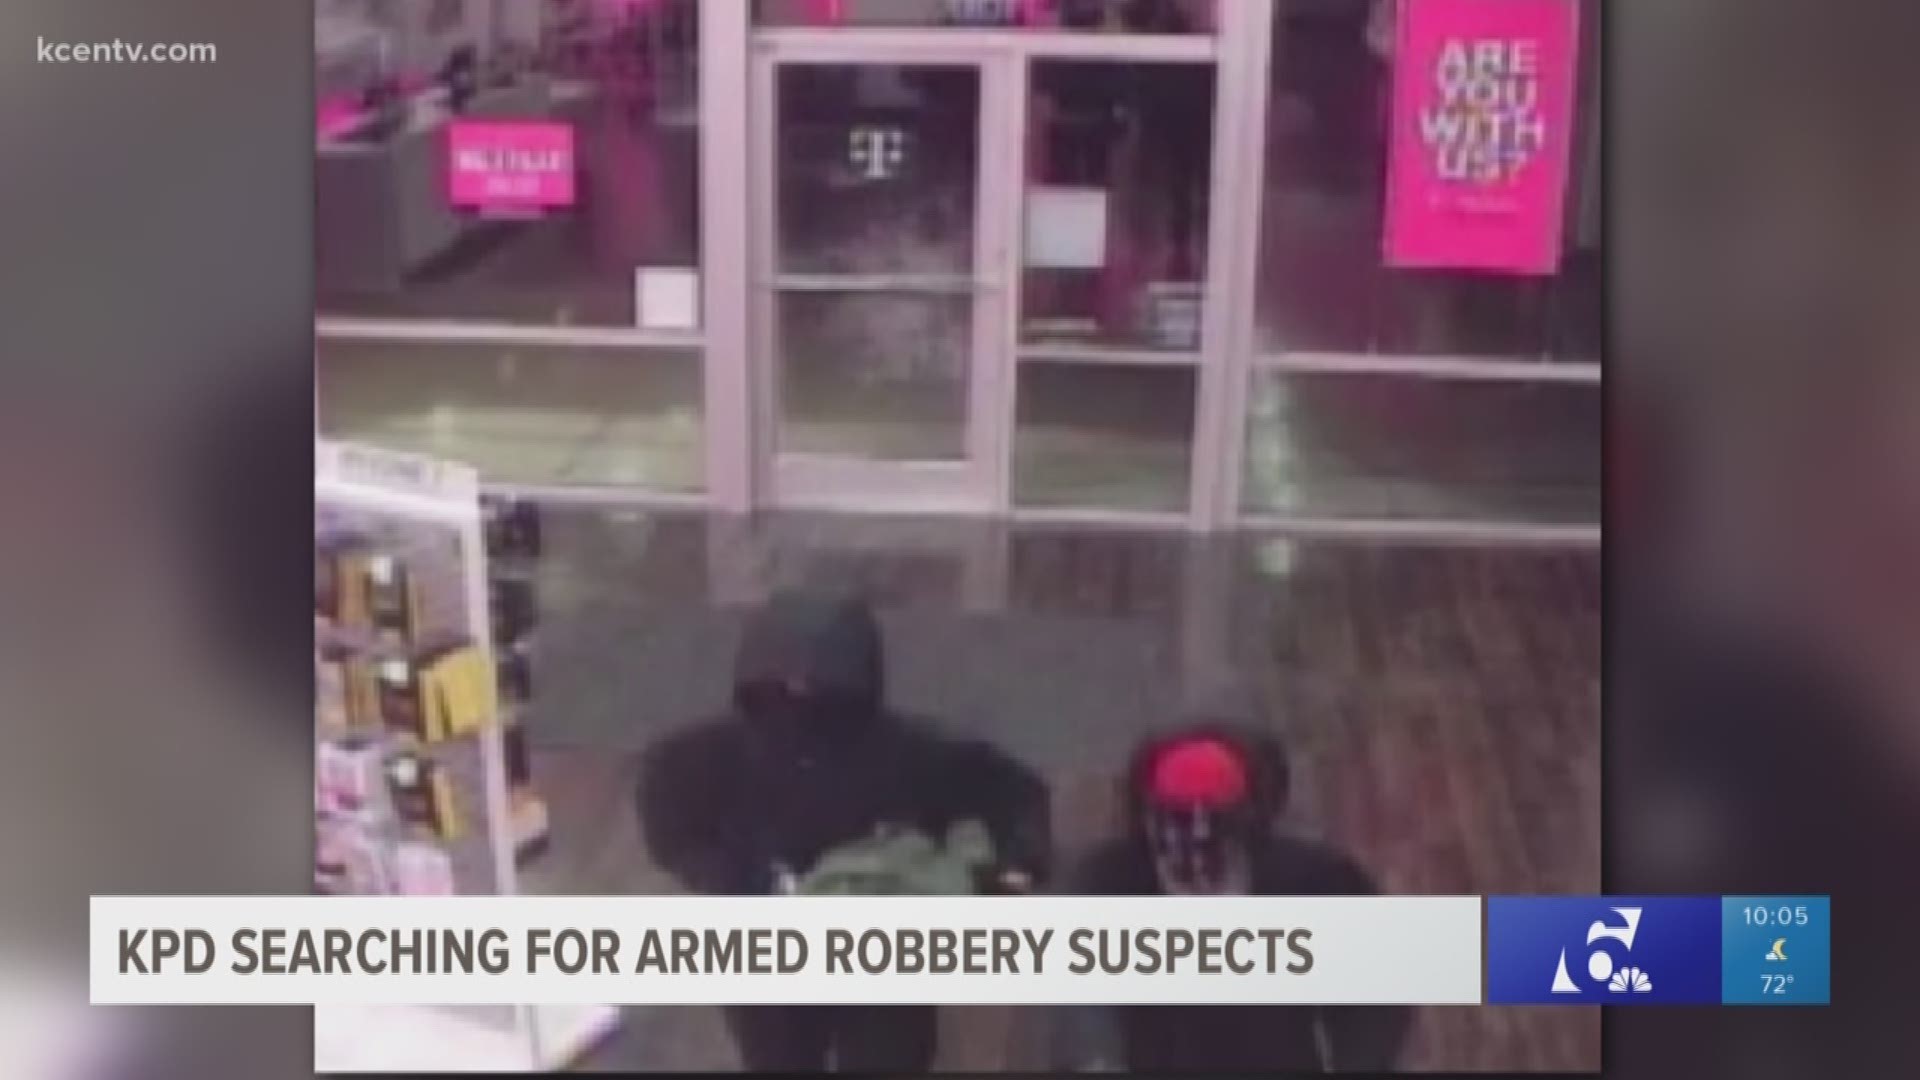 Two suspects stole multiple phones from a Killeen T-Mobile before running away.